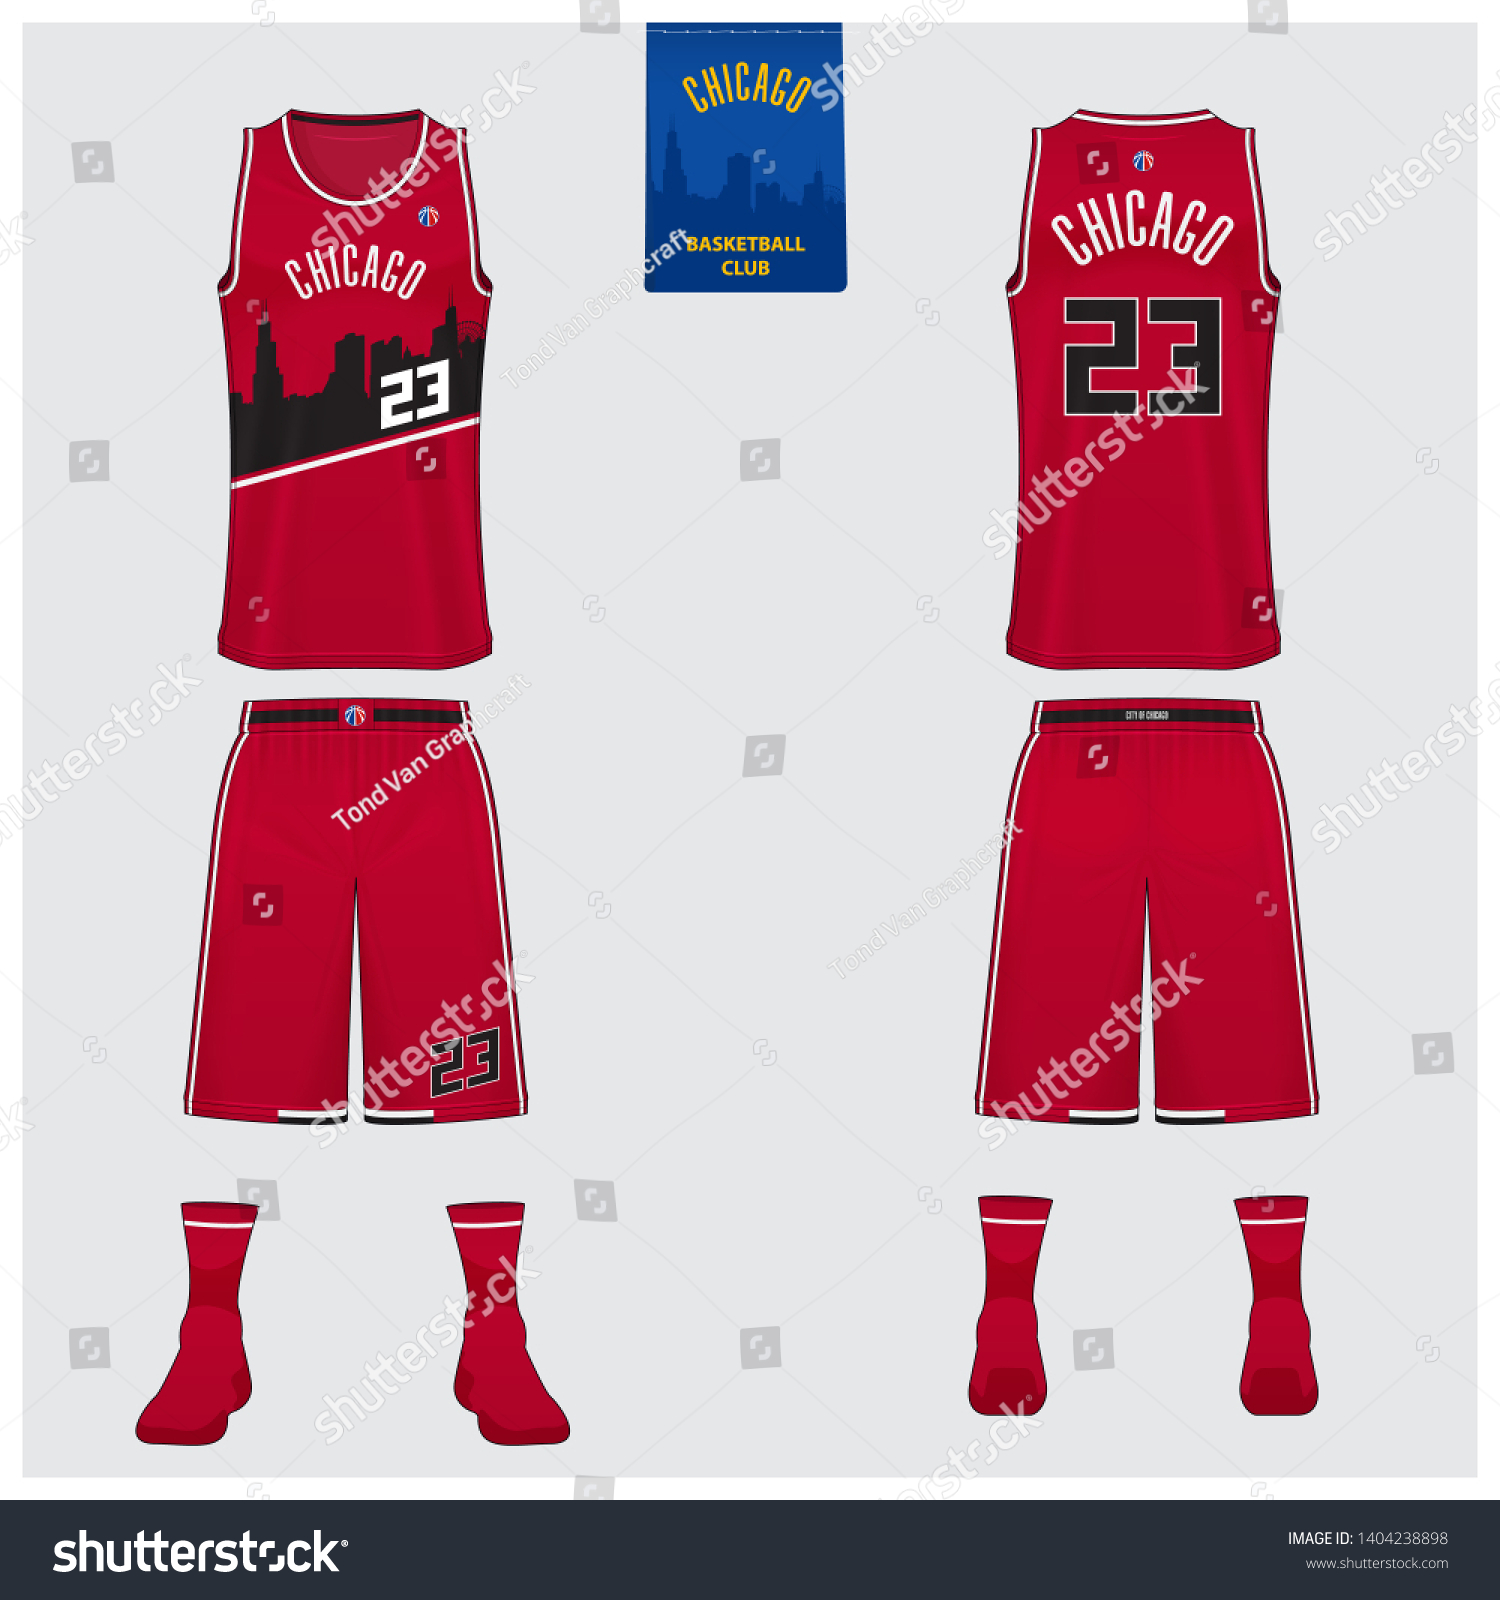 14+ Basketball Kit Mockup Front View Gif Yellowimages ...